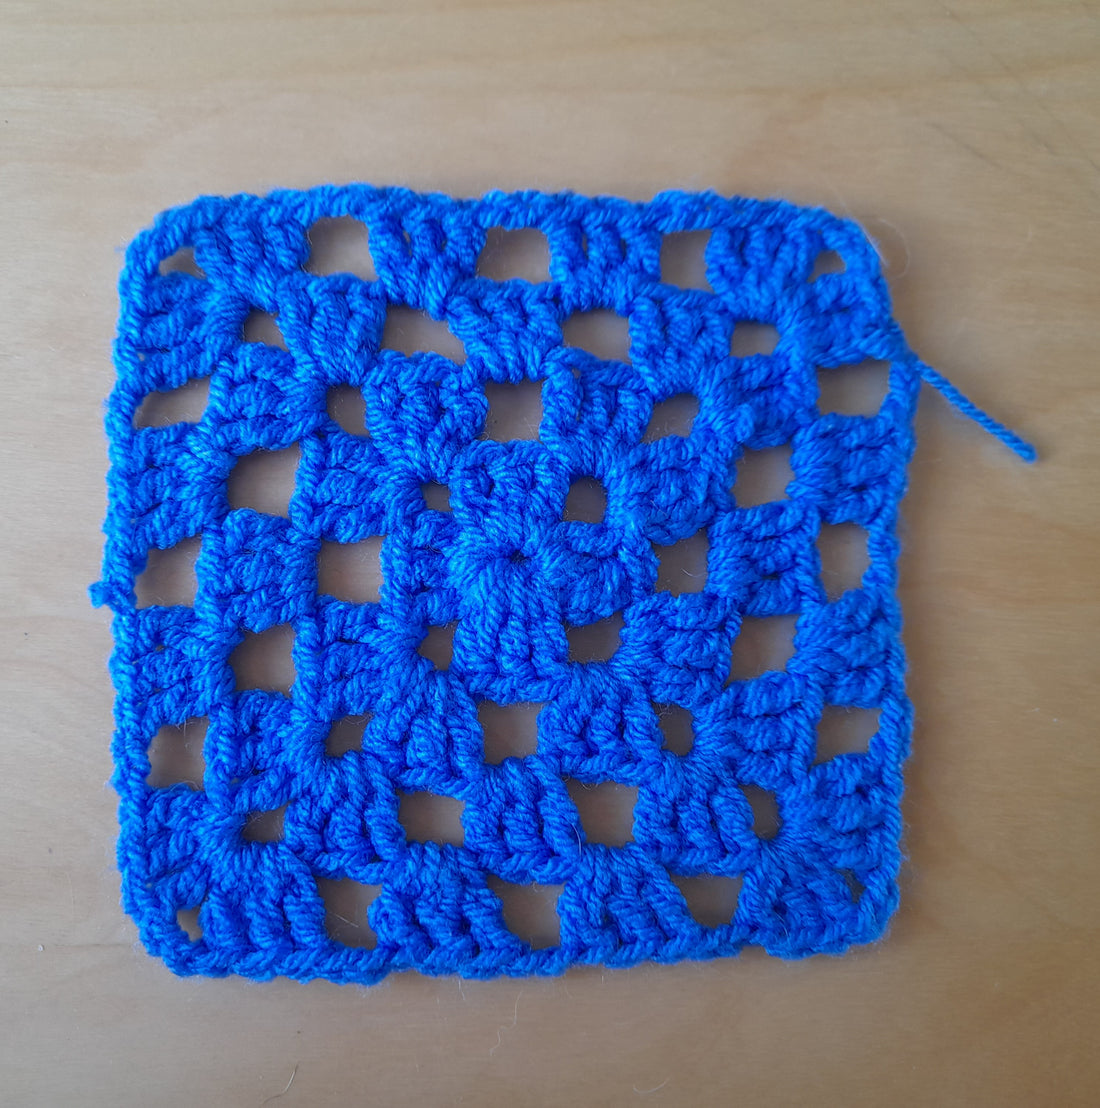 How to get your granny squares right every time. – Germander